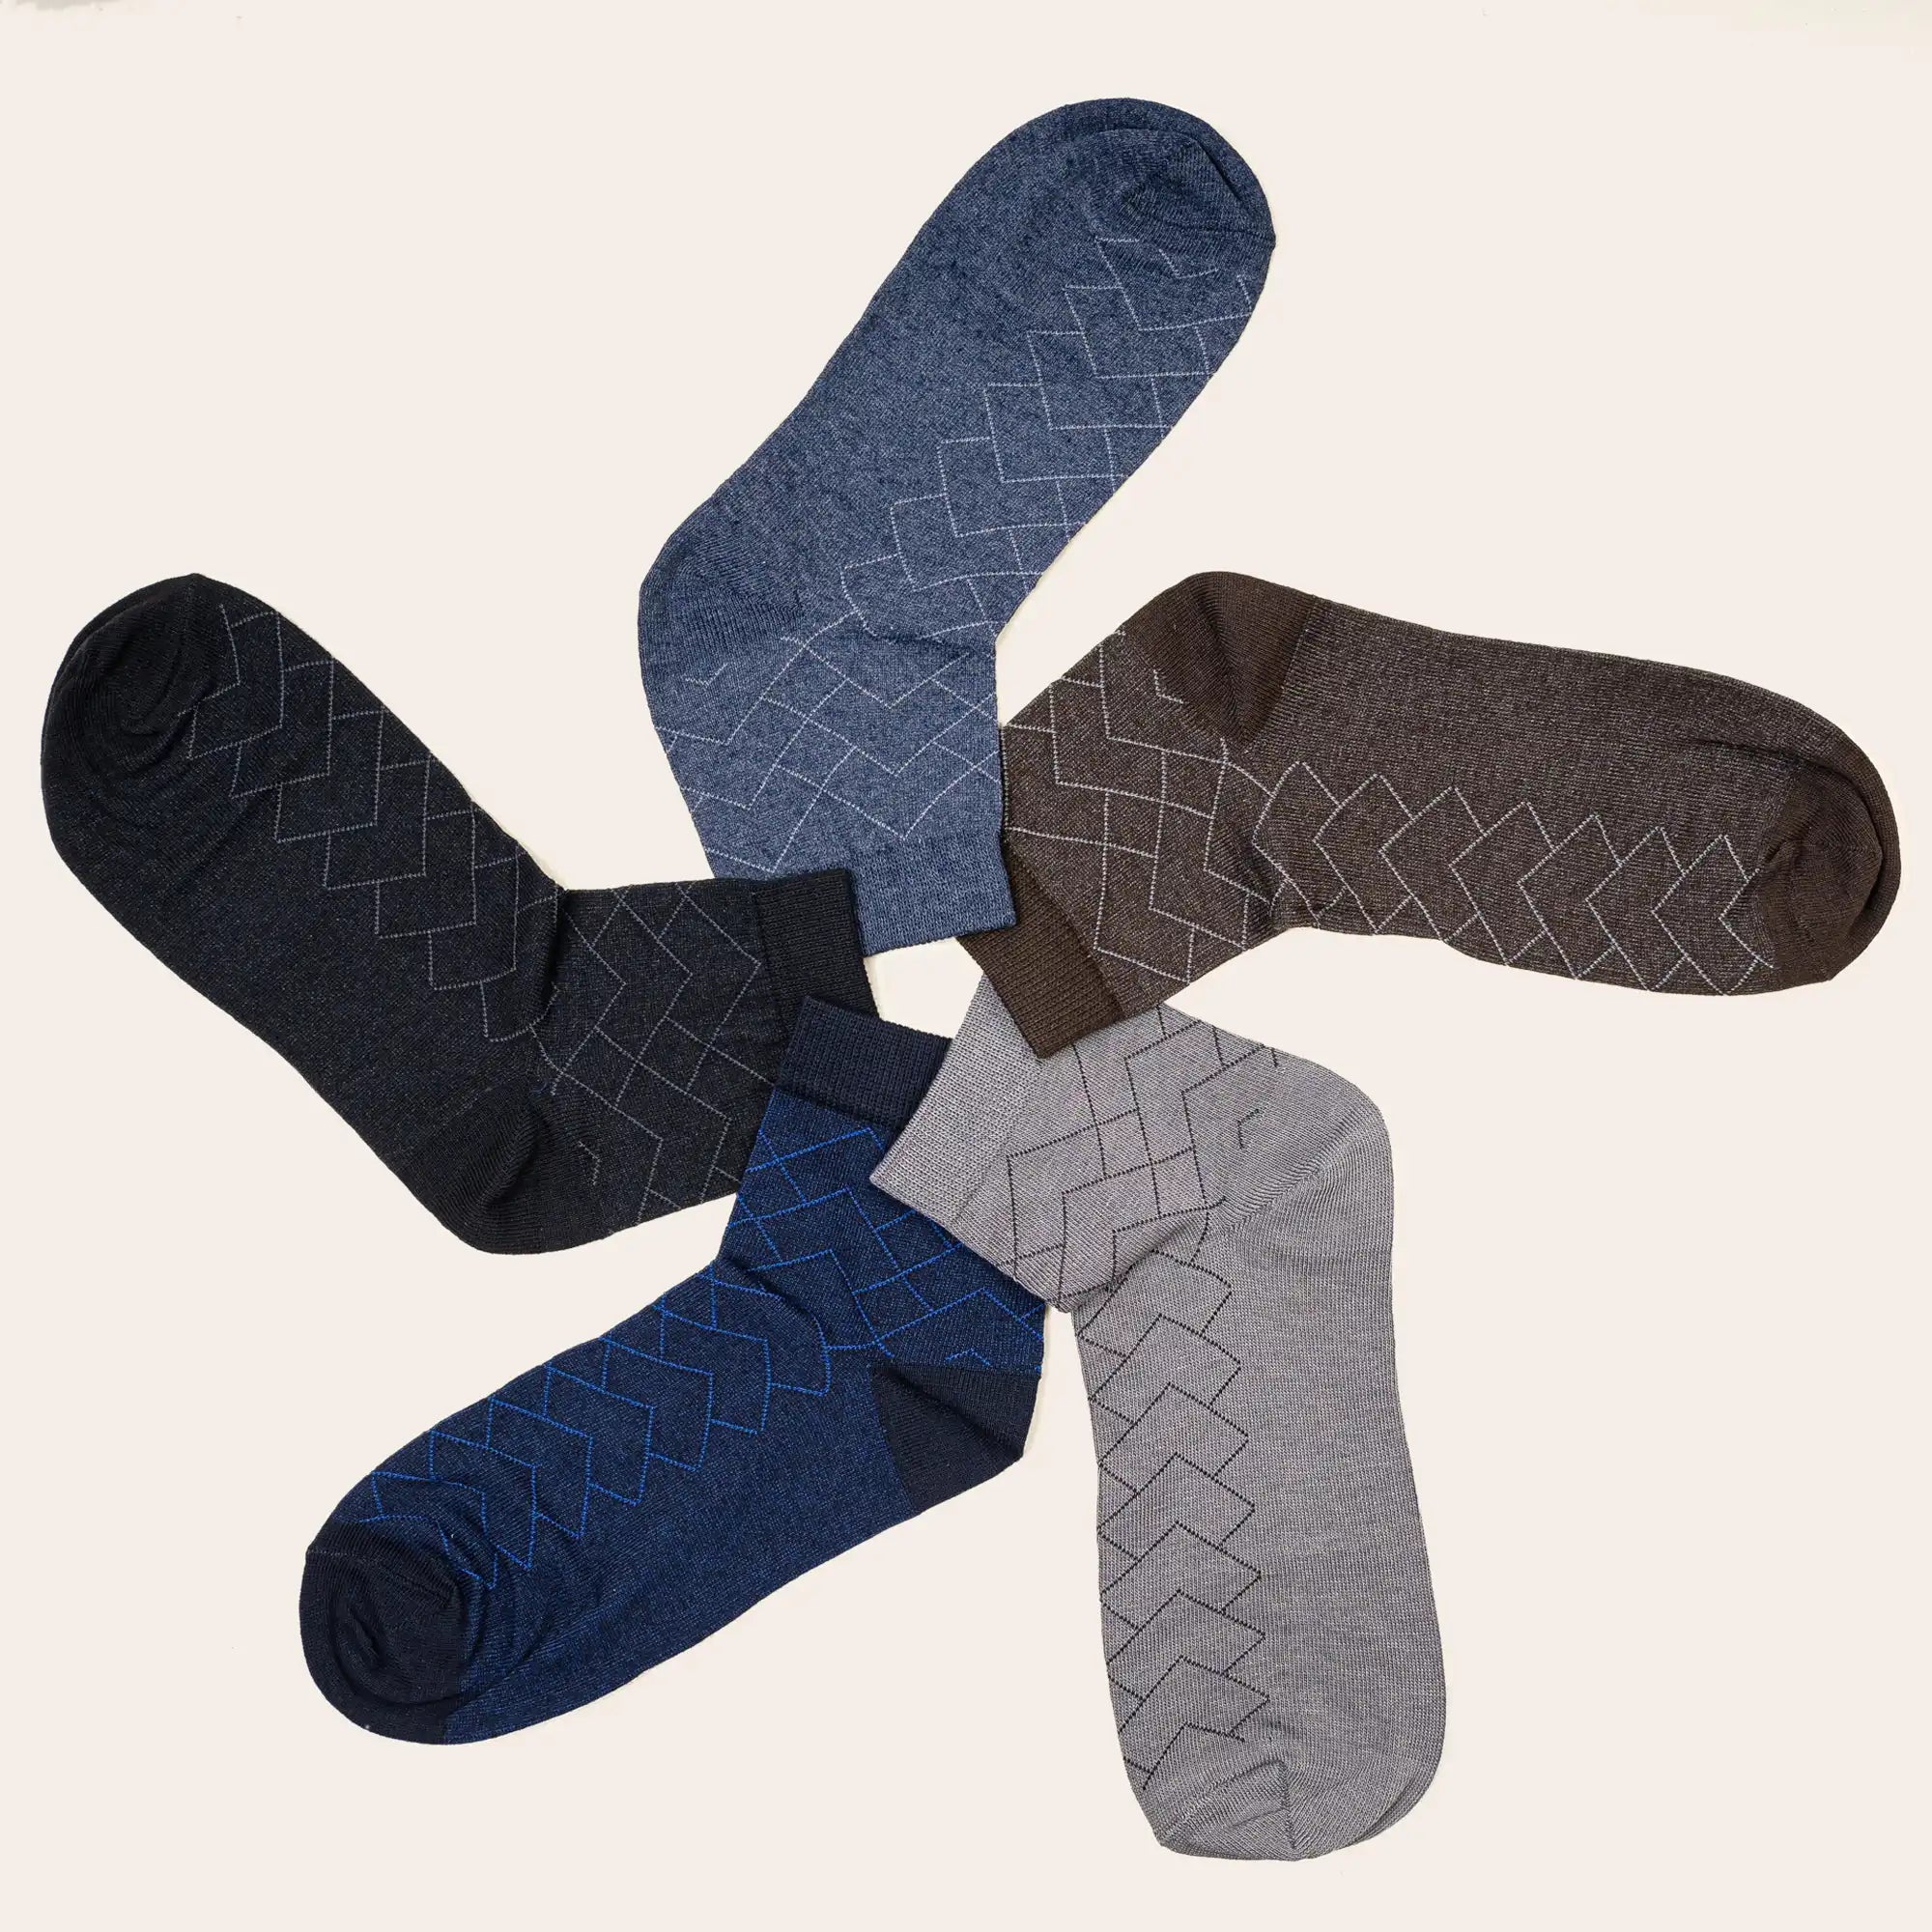 Young Wings Men's Multi Colour Cotton Fabric Solid Ankle Length Socks - Pack of 5, Style no. 2305-M1